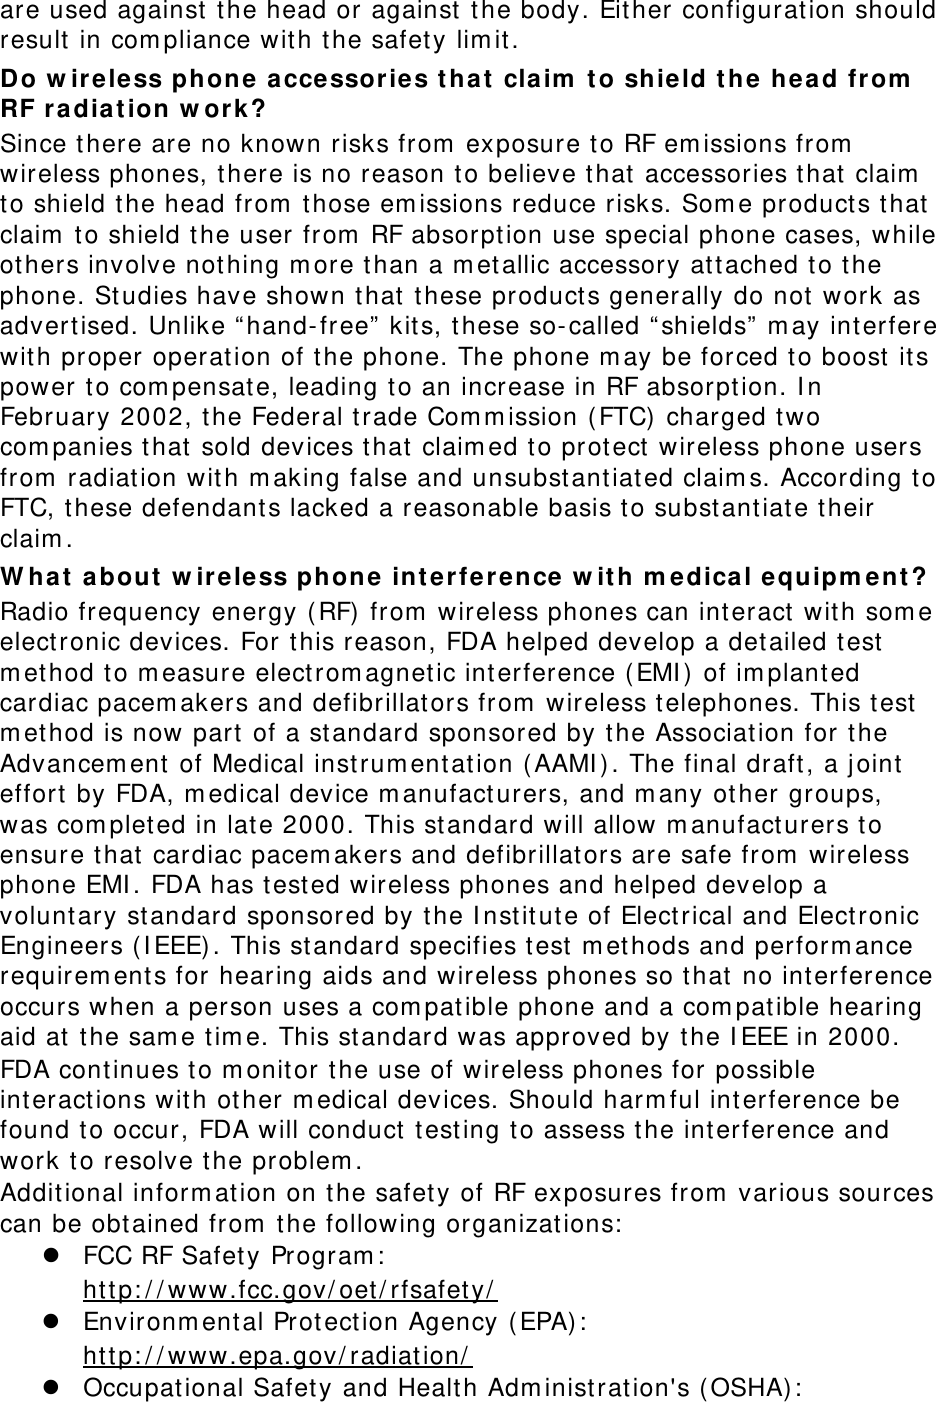 are used against  t he head or against  t he body. Either configurat ion should result  in com pliance with the safet y lim it . Do w ireless phone a ccessor ies t ha t  claim  t o shield t he hea d from  RF r a diat ion w or k? Since t here are no known risks from  exposure t o RF em issions from  wireless phones, t here is no reason to believe that  accessories t hat claim  to shield t he head from  those em issions reduce risks. Som e product s that  claim  t o shield t he user  from  RF absorption use special phone cases, while ot hers involve not hing m ore t han a m et allic accessory at t ached t o the phone. St udies have shown that  t hese products generally do not work as advert ised. Unlike “ hand-free”  kits, t hese so-called “ shields”  m ay int erfere wit h proper operat ion of t he phone. The phone m ay be forced to boost  it s power t o com pensate, leading t o an increase in RF absorpt ion. I n February 2002, the Federal trade Com m ission ( FTC) charged two com panies t hat sold devices t hat  claim ed to prot ect wireless phone users from  radiation wit h m aking false and unsubst ant iated claim s. According t o FTC, these defendants lacked a reasonable basis t o subst antiate t heir claim . W hat  a bout  w ir eless phon e int erfere nce w it h m edica l equipm ent ? Radio frequency energy ( RF)  from  wireless phones can int eract  with som e electronic devices. For t his r eason, FDA helped develop a det ailed test  m et hod t o m easure elect rom agnetic int erference ( EMI )  of im plant ed cardiac pacem akers and defibrillators from  wireless t elephones. This t est  m et hod is now part of a standard sponsored by t he Associat ion for t he Advancem ent  of Medical inst rum ent ation ( AAMI ) . The final draft, a j oint  effort  by FDA, m edical device m anufact urers, and m any ot her groups, was com plet ed in lat e 2000. This st andard will allow m anufacturers t o ensure that cardiac pacem akers and defibrillat ors are safe from  wireless phone EMI . FDA has test ed wireless phones and helped develop a volunt ary st andar d sponsored by the I nst it ut e of Elect rical and Elect ronic Engineers ( I EEE) . This standard specifies t est  m et hods and perform ance requirem ent s for hearing aids and wireless phones so t hat  no int erference occurs when a person uses a com pat ible phone and a com patible hear ing aid at  t he sam e tim e. This standard was approved by t he I EEE in 2000. FDA continues t o m onit or t he use of wir eless phones for possible int eract ions wit h ot her m edical devices. Should harm ful int erference be found t o occur, FDA w ill conduct  t est ing t o assess t he interference and work to resolve t he problem . Additional inform at ion on the safety of RF exposures from  various sources can be obt ained from  t he following organizations:   FCC RF Safety Program :    Environm ent al Prot ection Agency ( EPA) :  ht t p: / / ww w.fcc.gov/ oet/ rfsafet y/    Occupat ional Safet y  and Healt h Adm inistrat ion&apos;s ( OSHA) :    ht t p: / / ww w.epa.gov / radiat ion/  